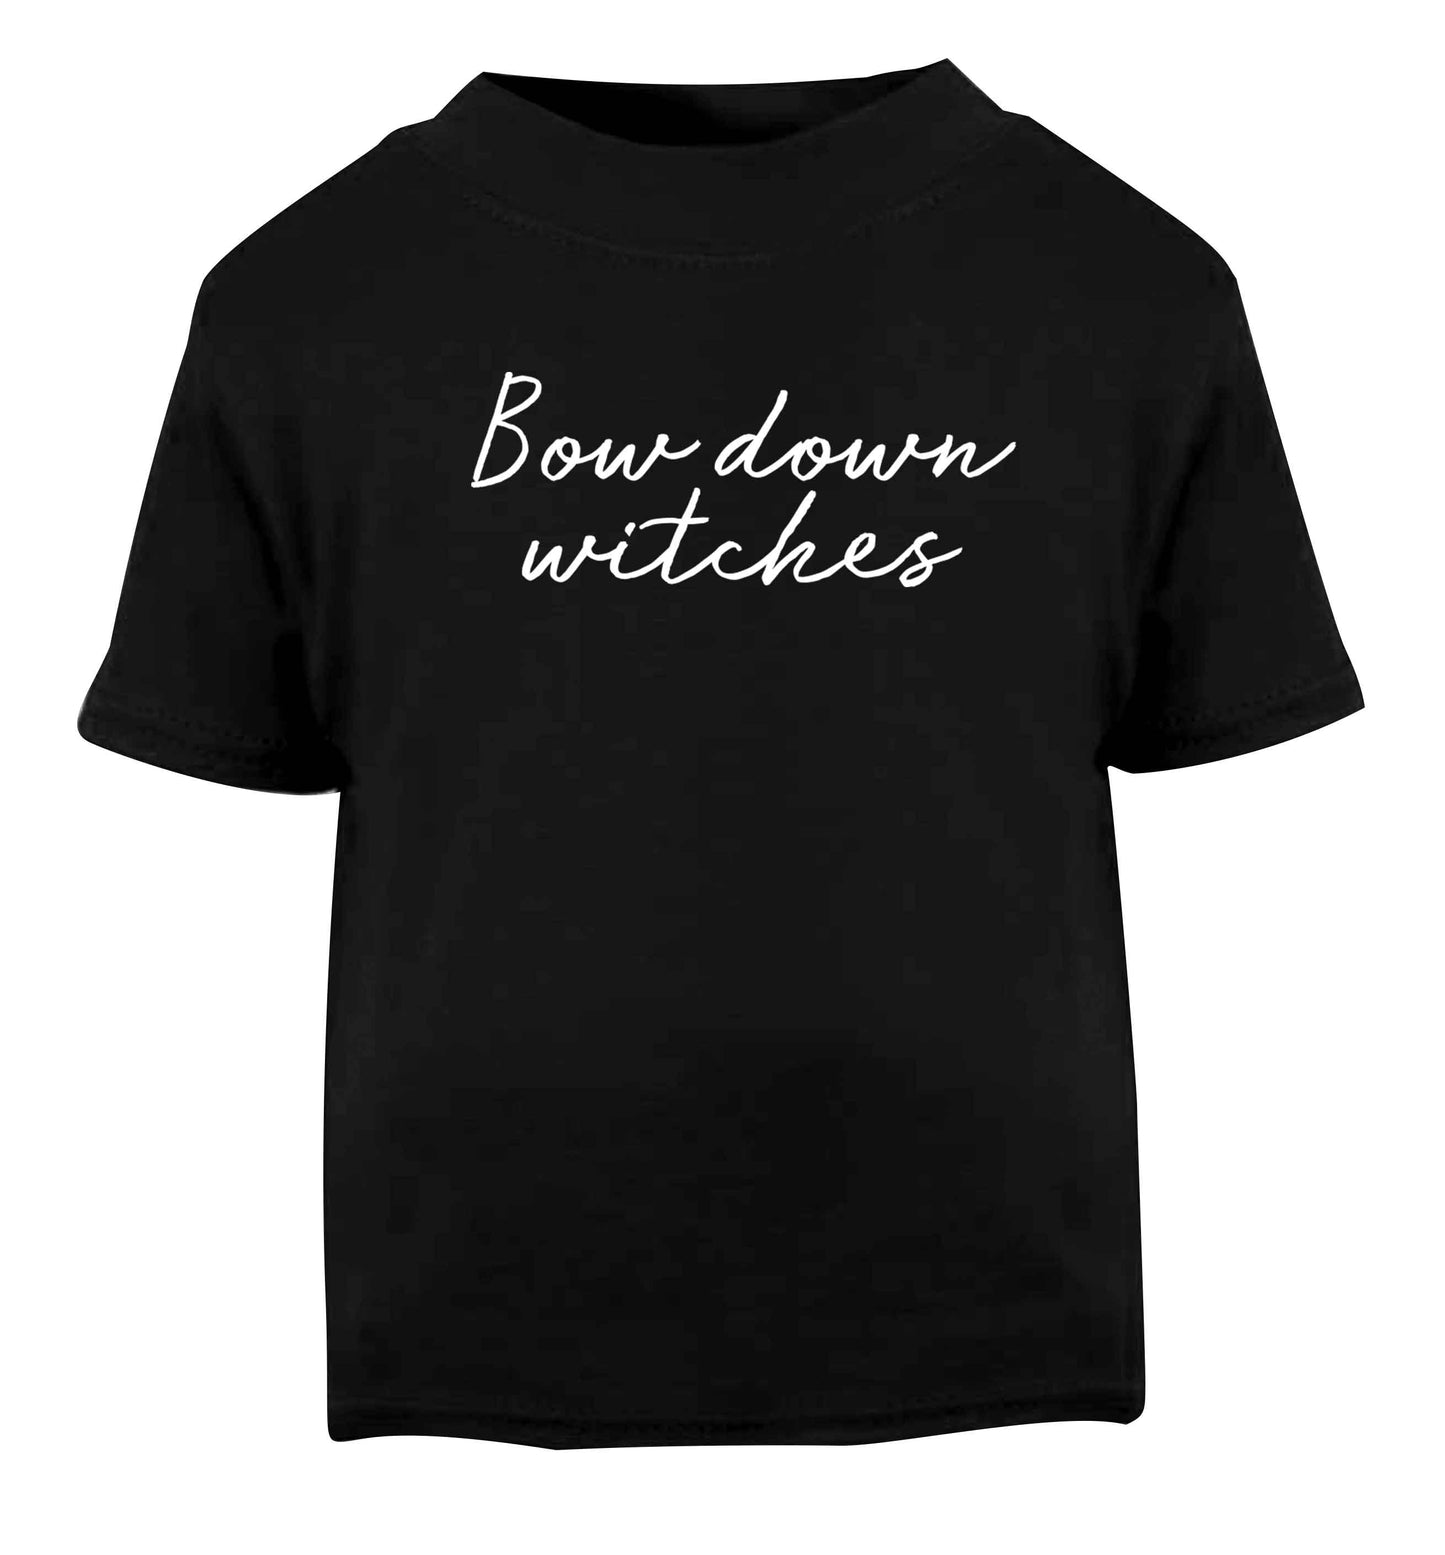 Bow down witches Black baby toddler Tshirt 2 years